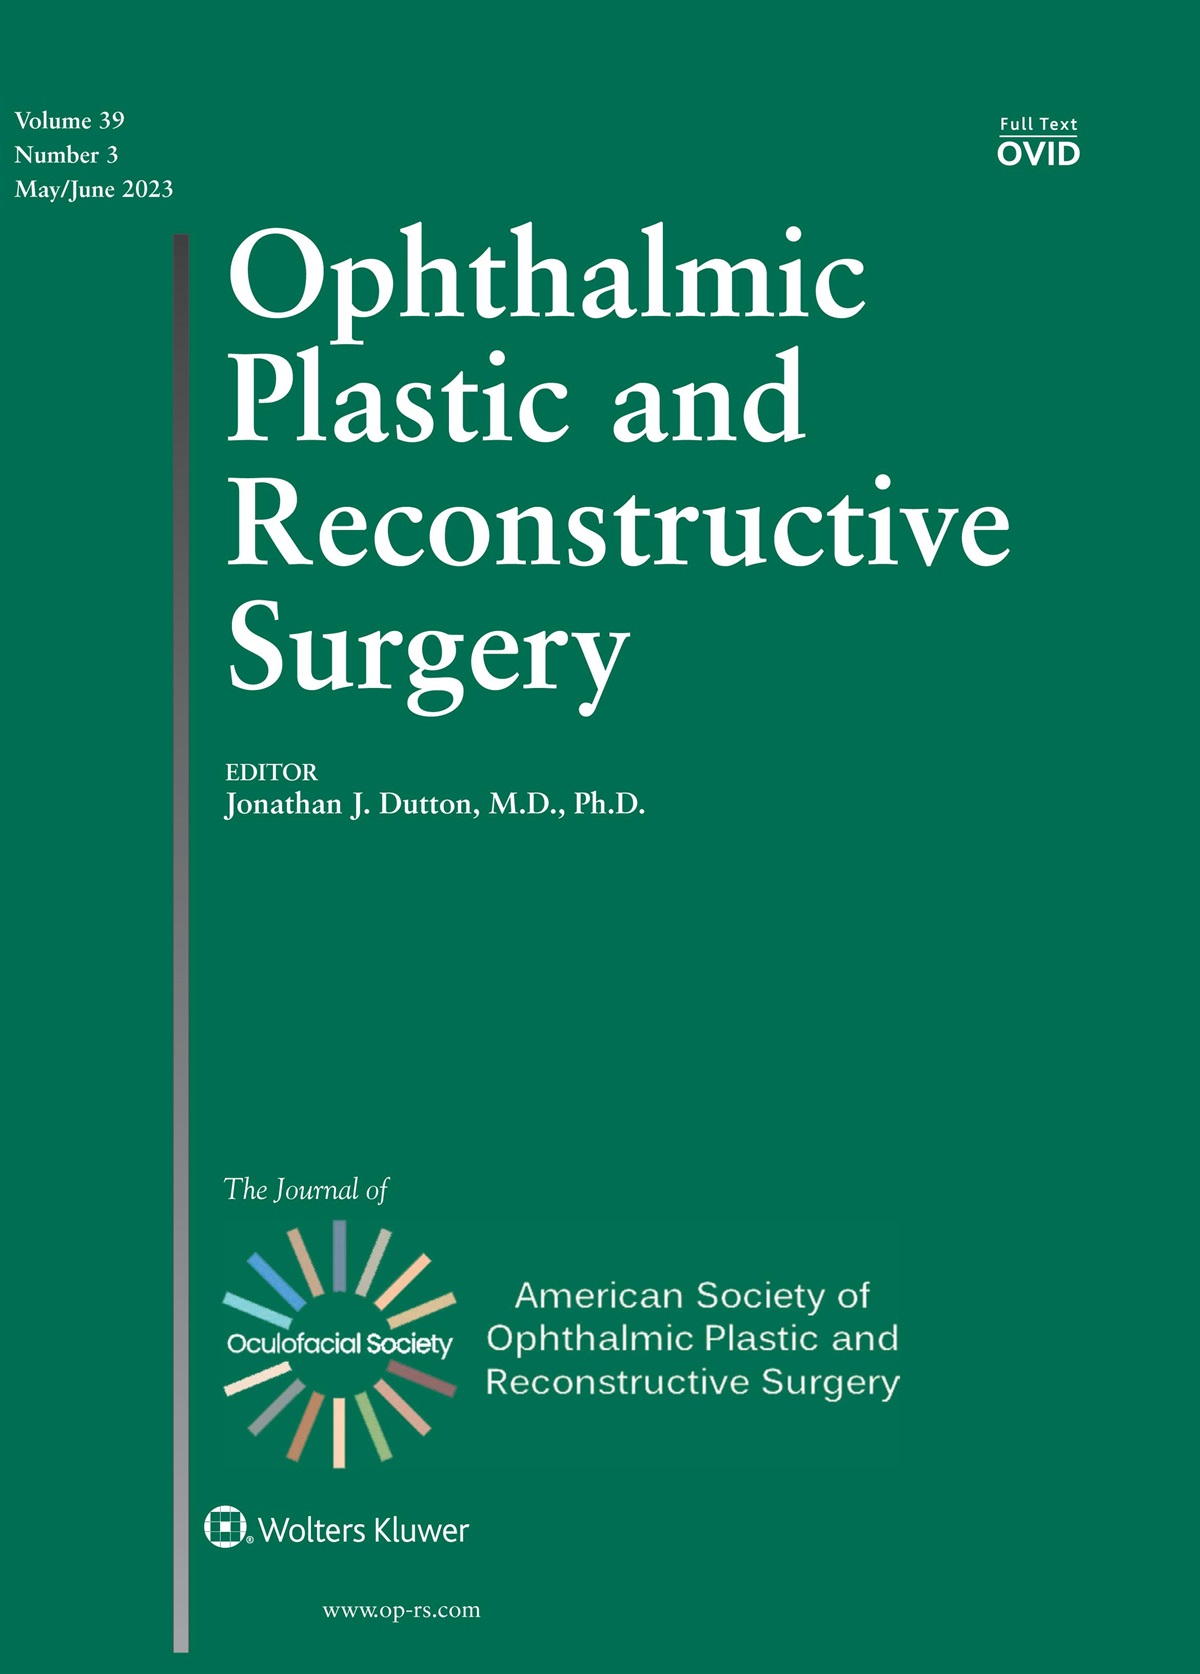 Reply Re: “Recognition of Oculofacial Plastic Surgery: Past, Present, and Future Directions”